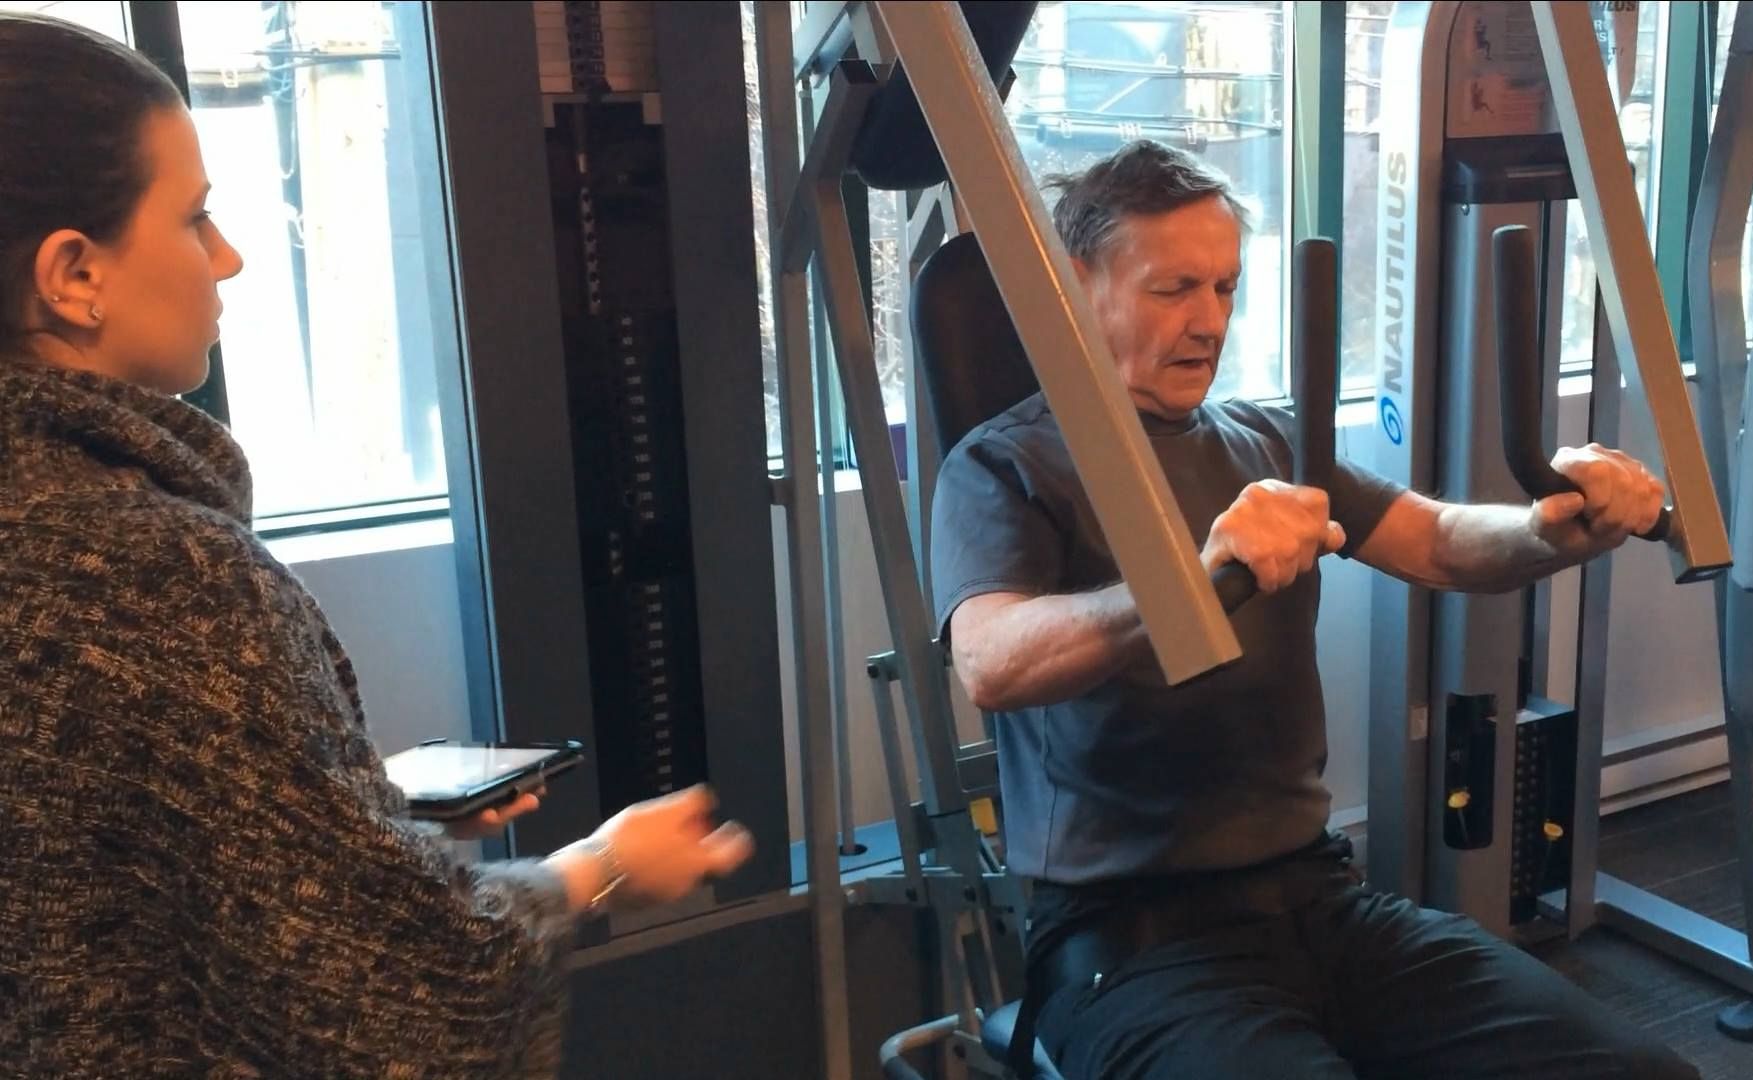 A man doing strength training on a weight machine.